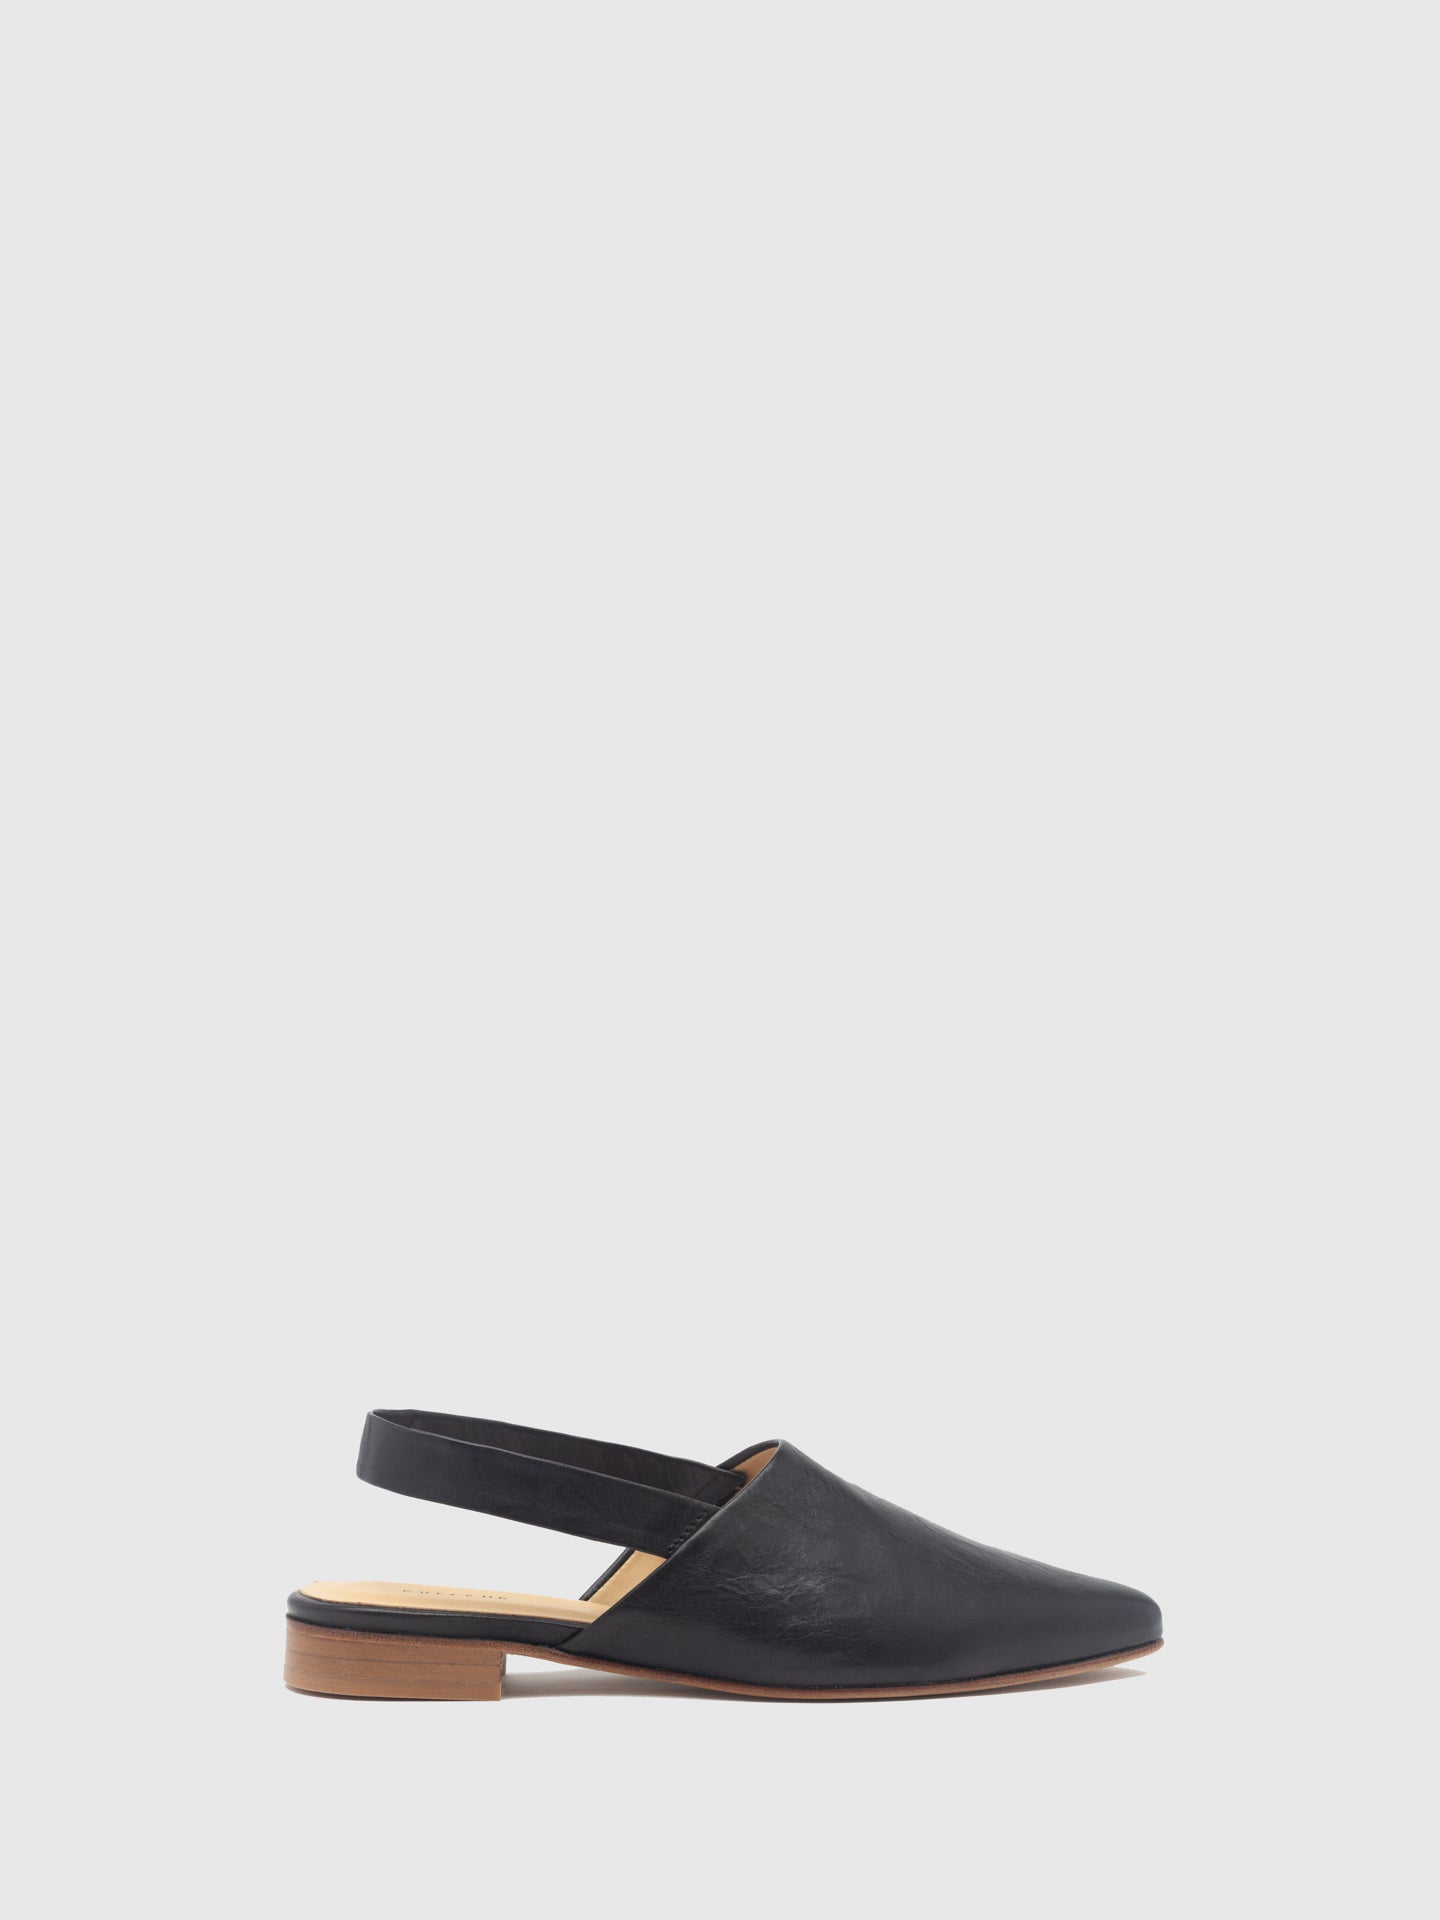 Only2Me Black Leather Sling-Back Mules